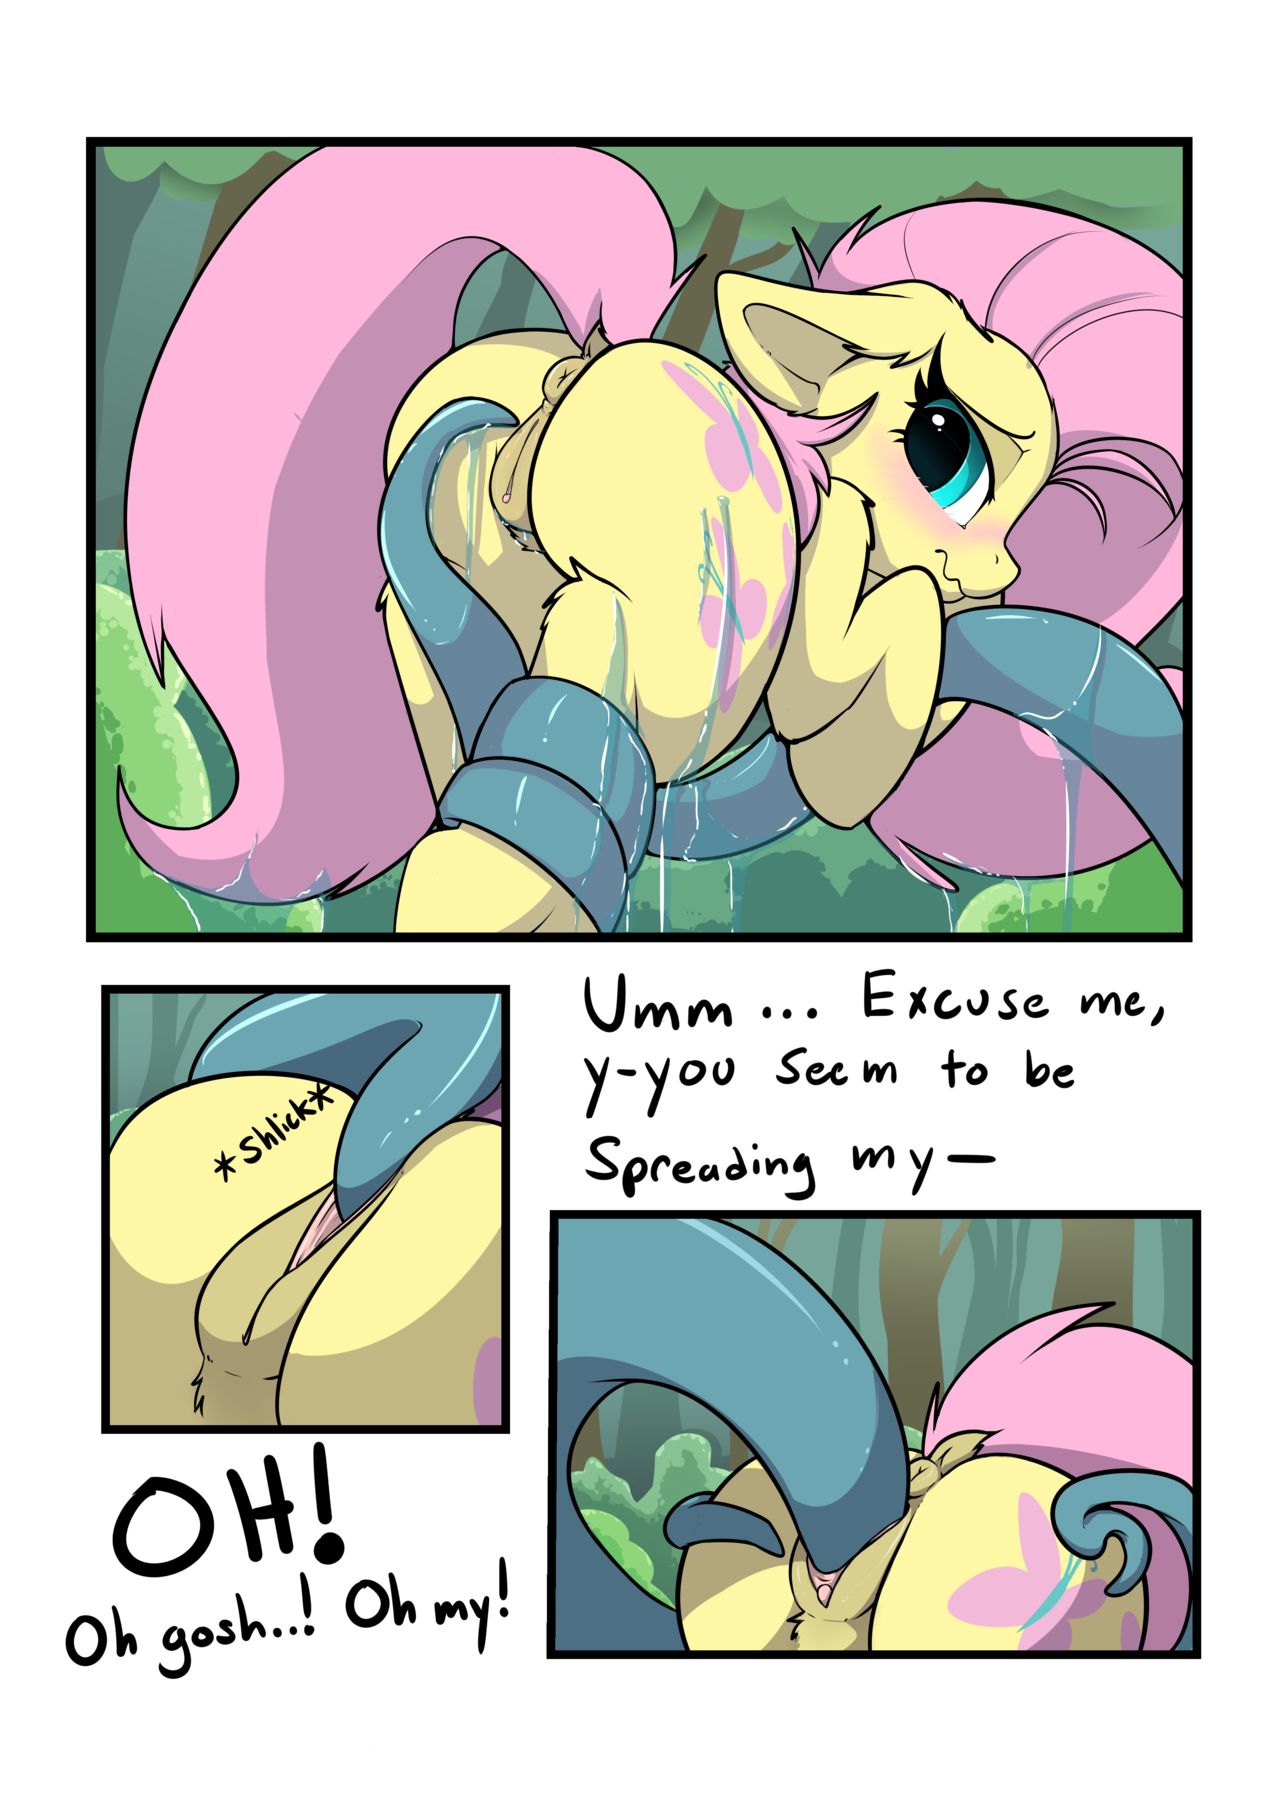 Giving fluttershy ride